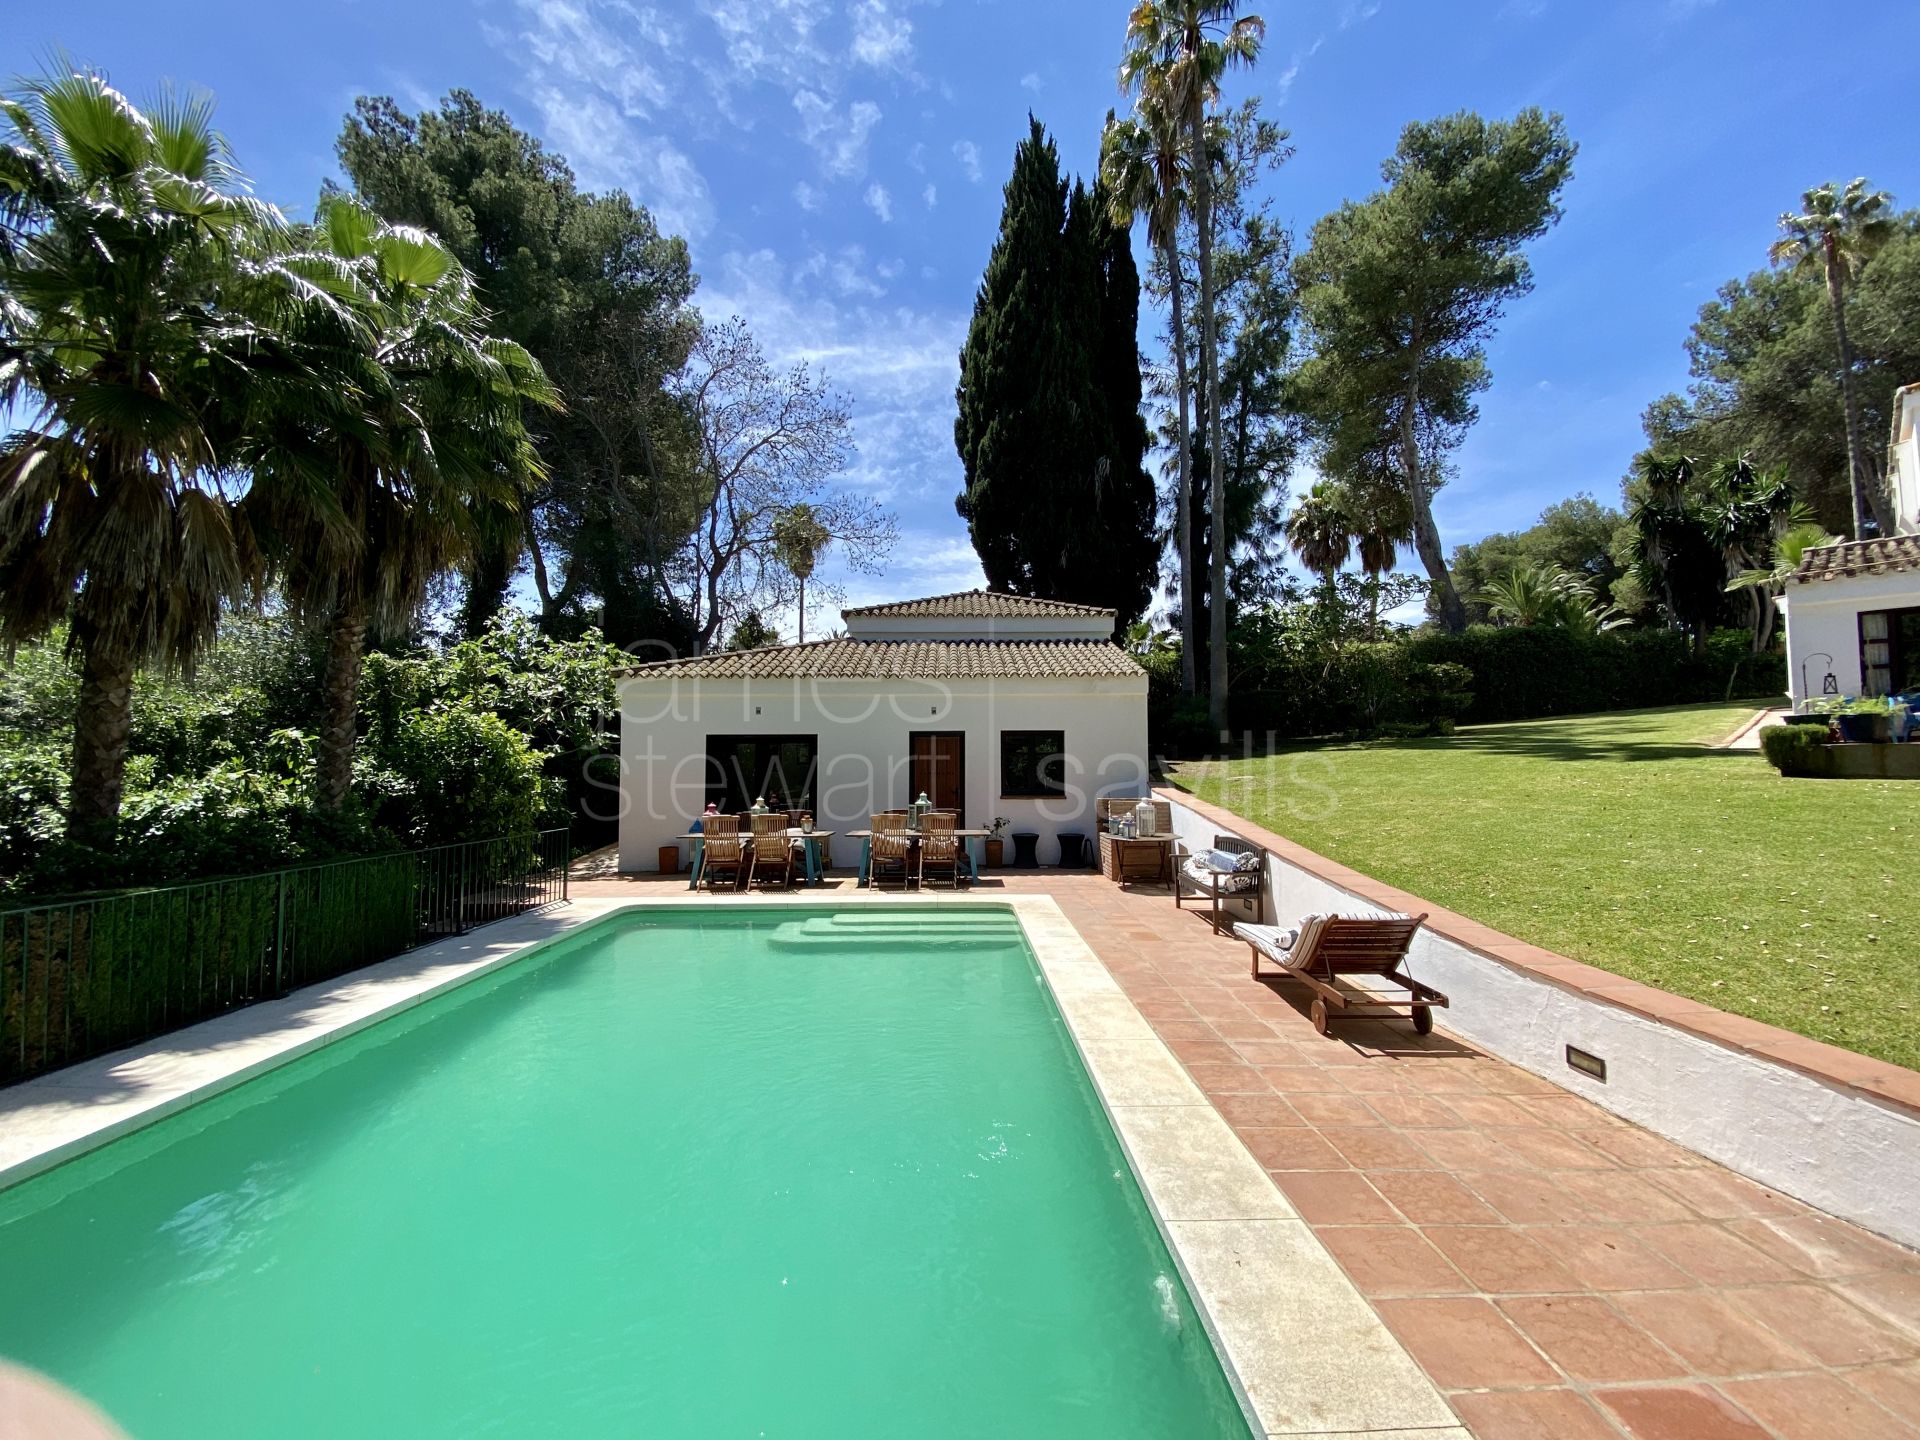 Villa with a poolside guest house in the A zone - Sotogrande Costa